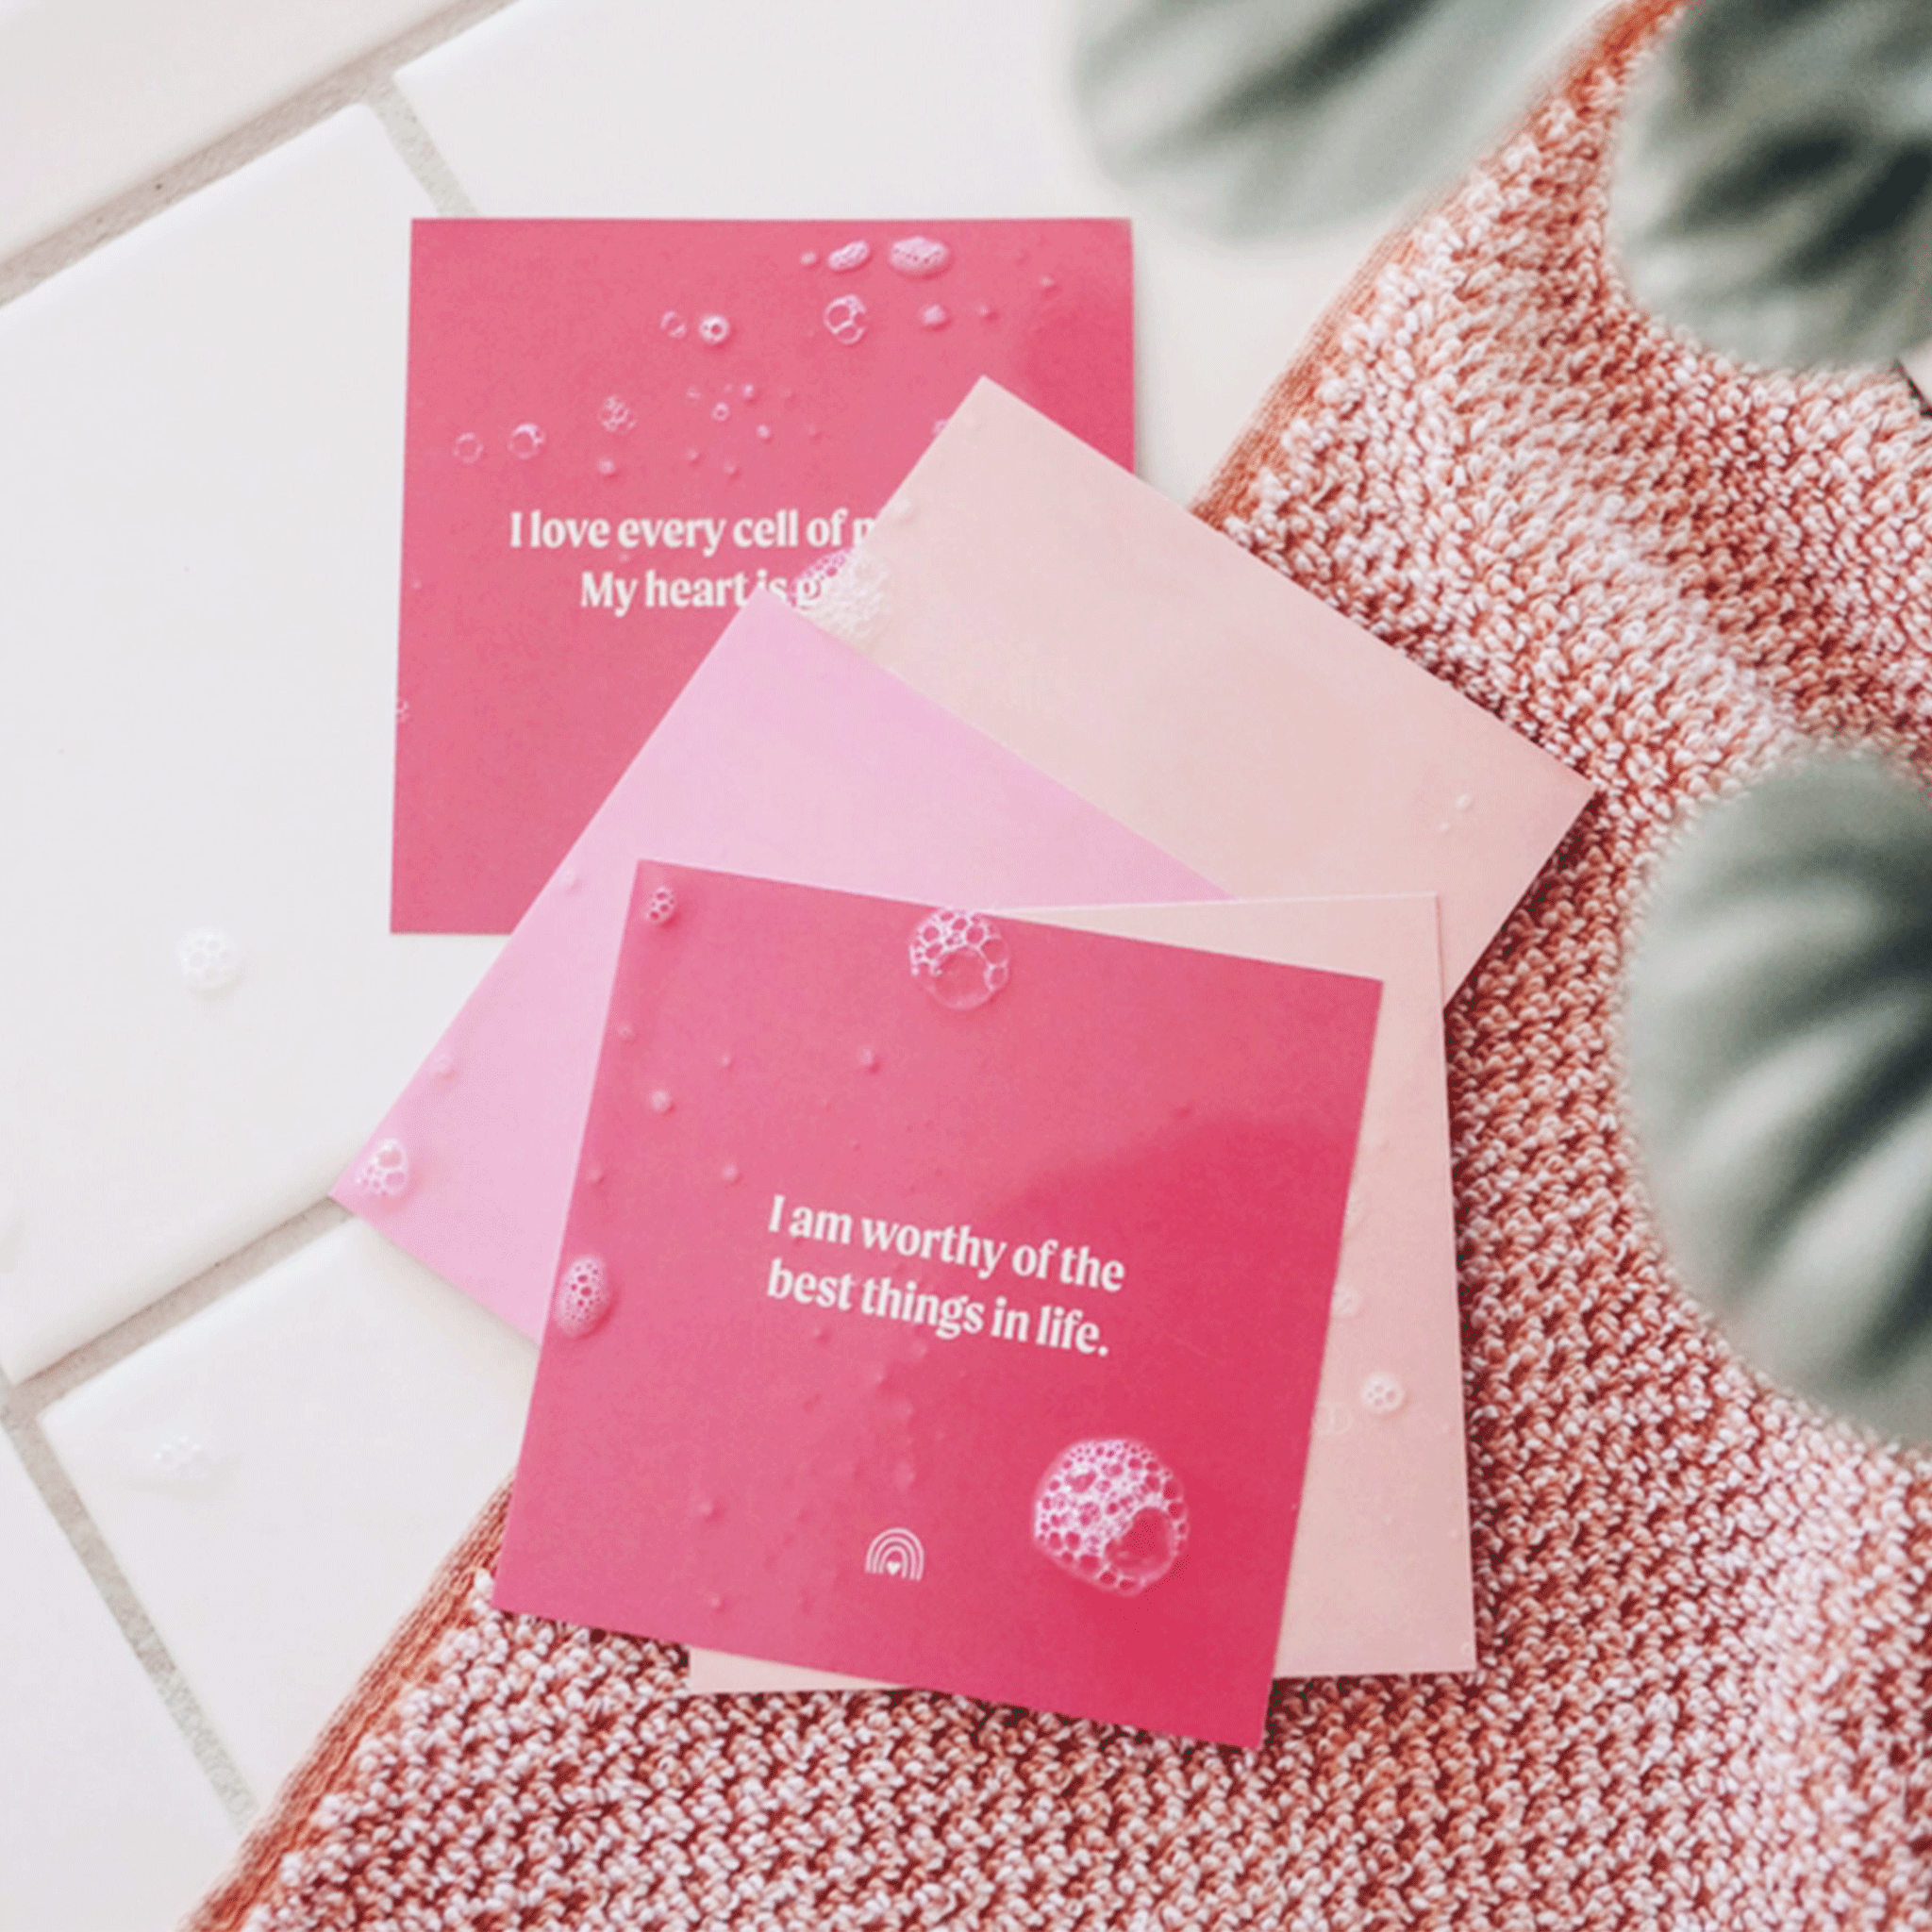 A set of light and hot pink square cards with white text that has various self love affirmation quotes on them. The squares once wet will stick to the shower walls.